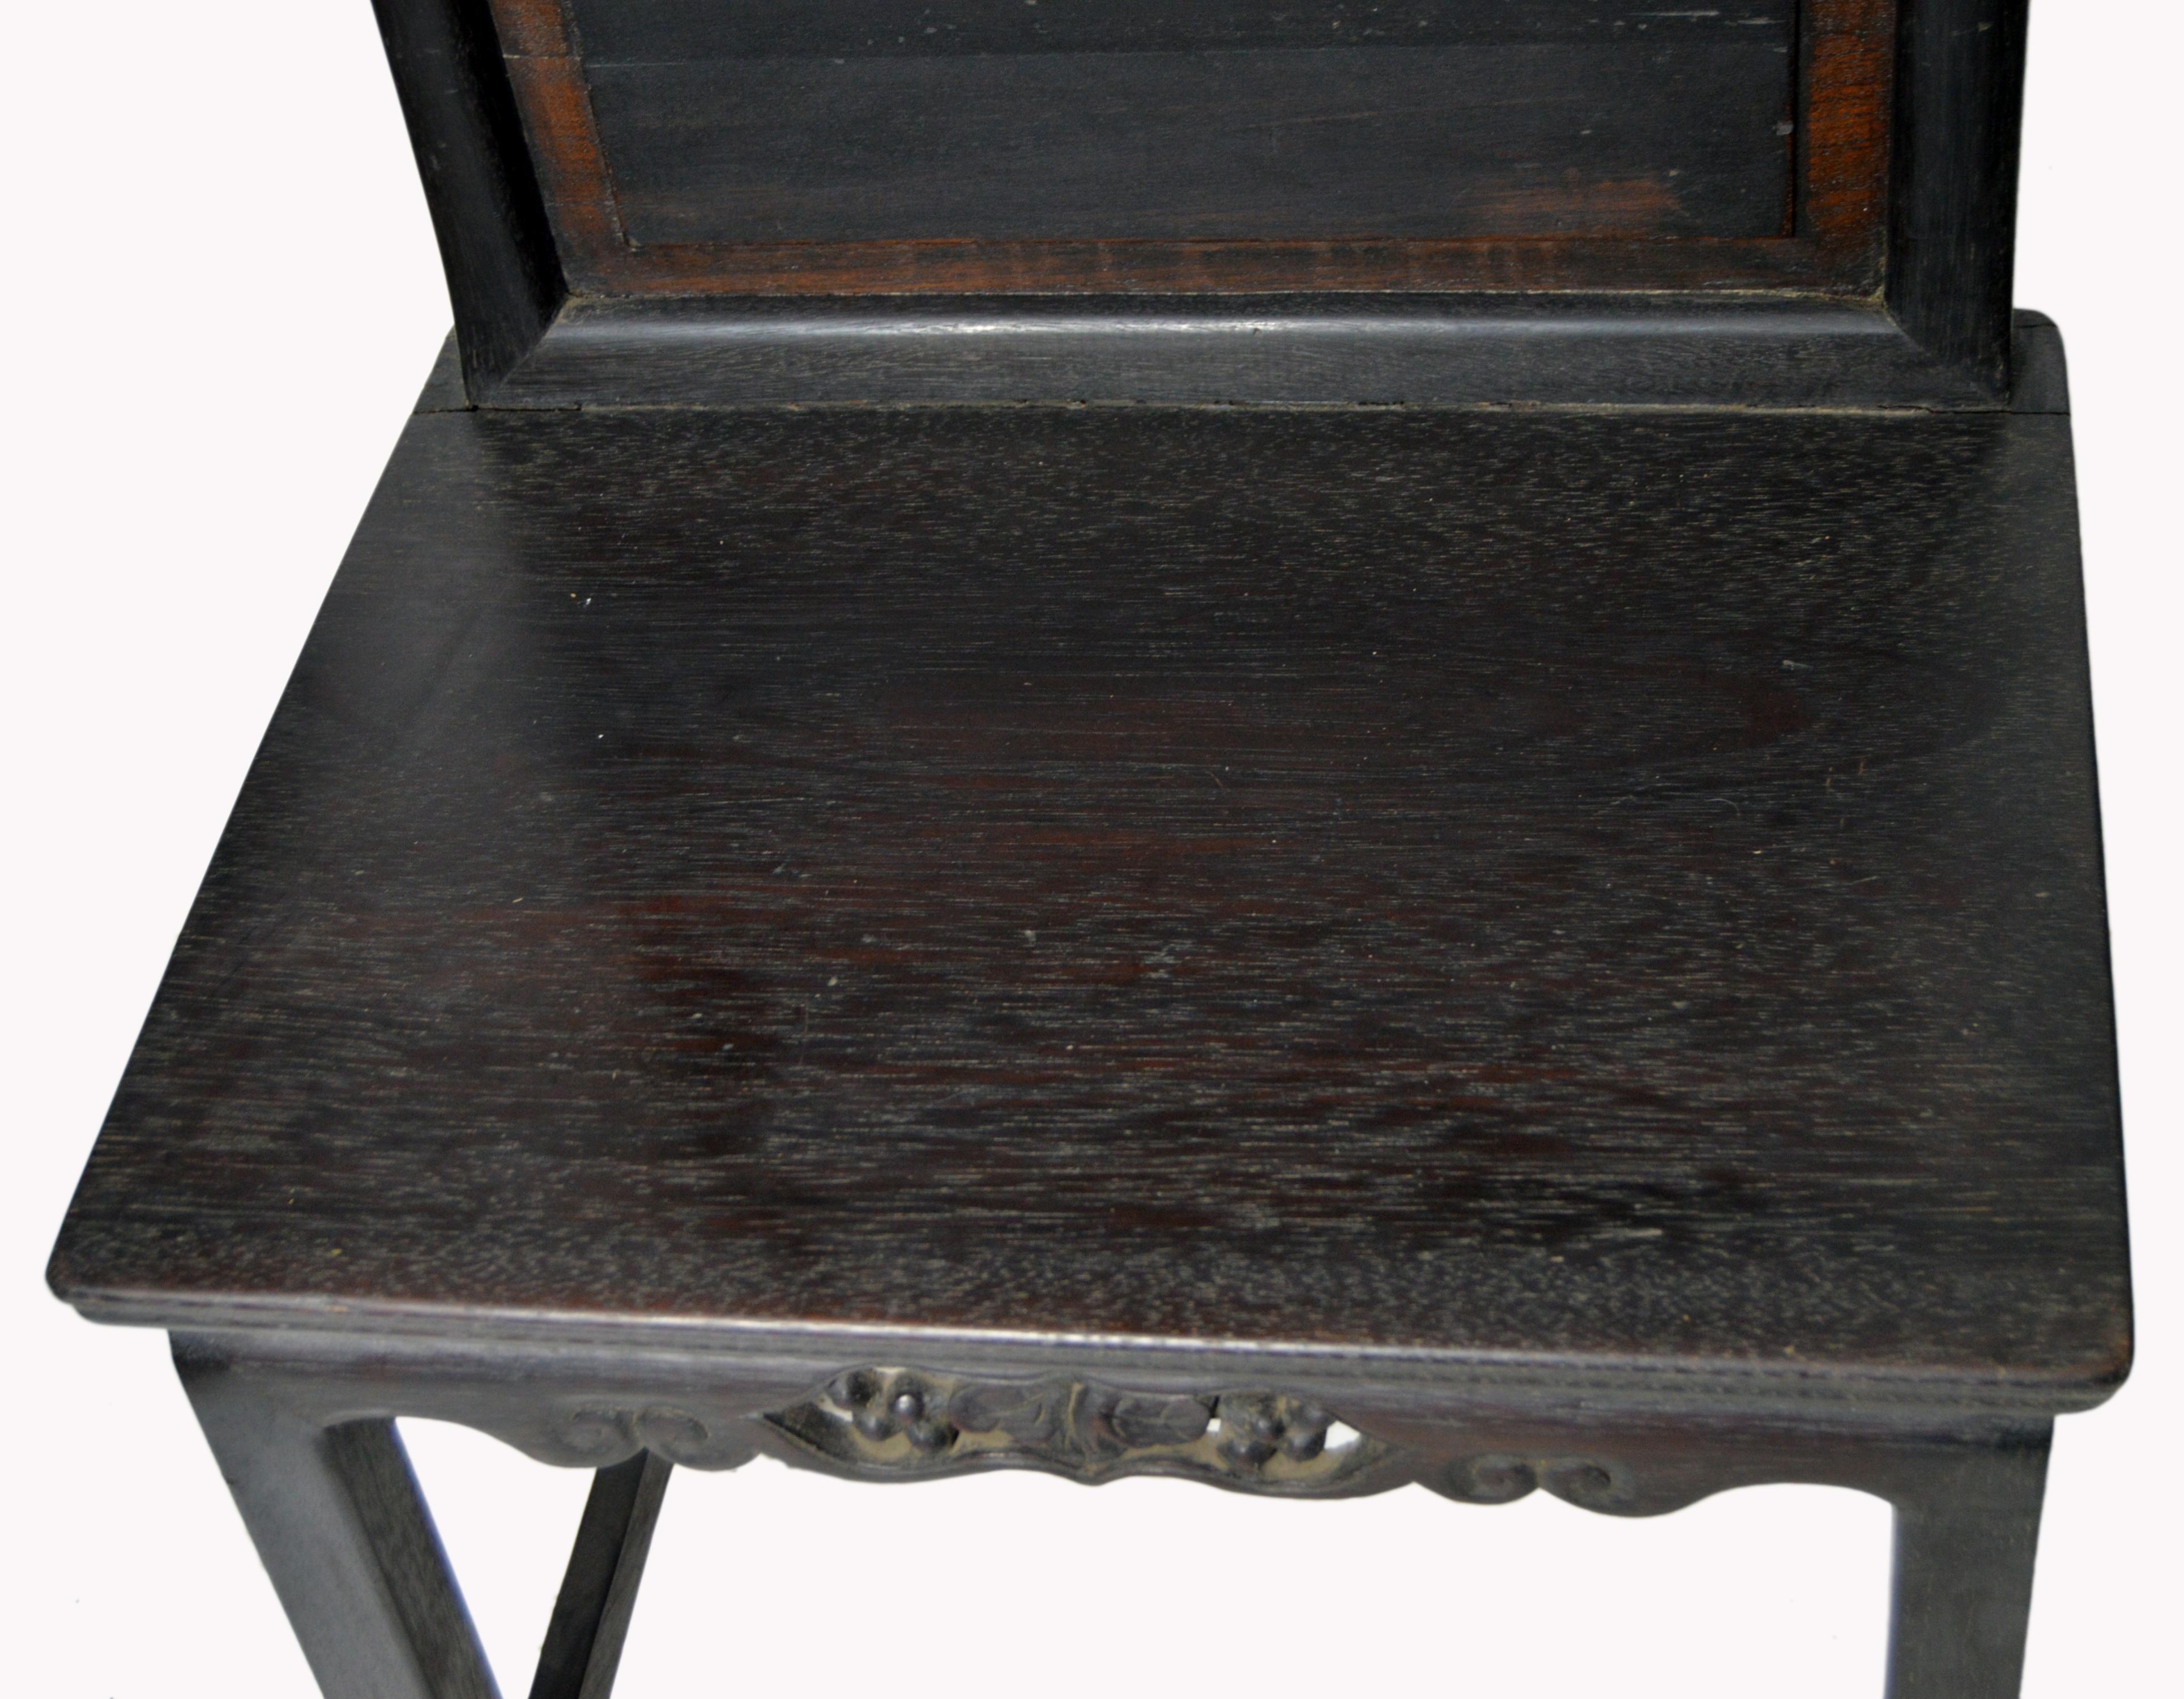 A Chinese Yumu wood side chair from the 19th century, with dark lacquered finish and hand-carved skirt. This Chinese accent side chair features a rectangular molded back topped with a sinuous rail and accented with a central raised panel following